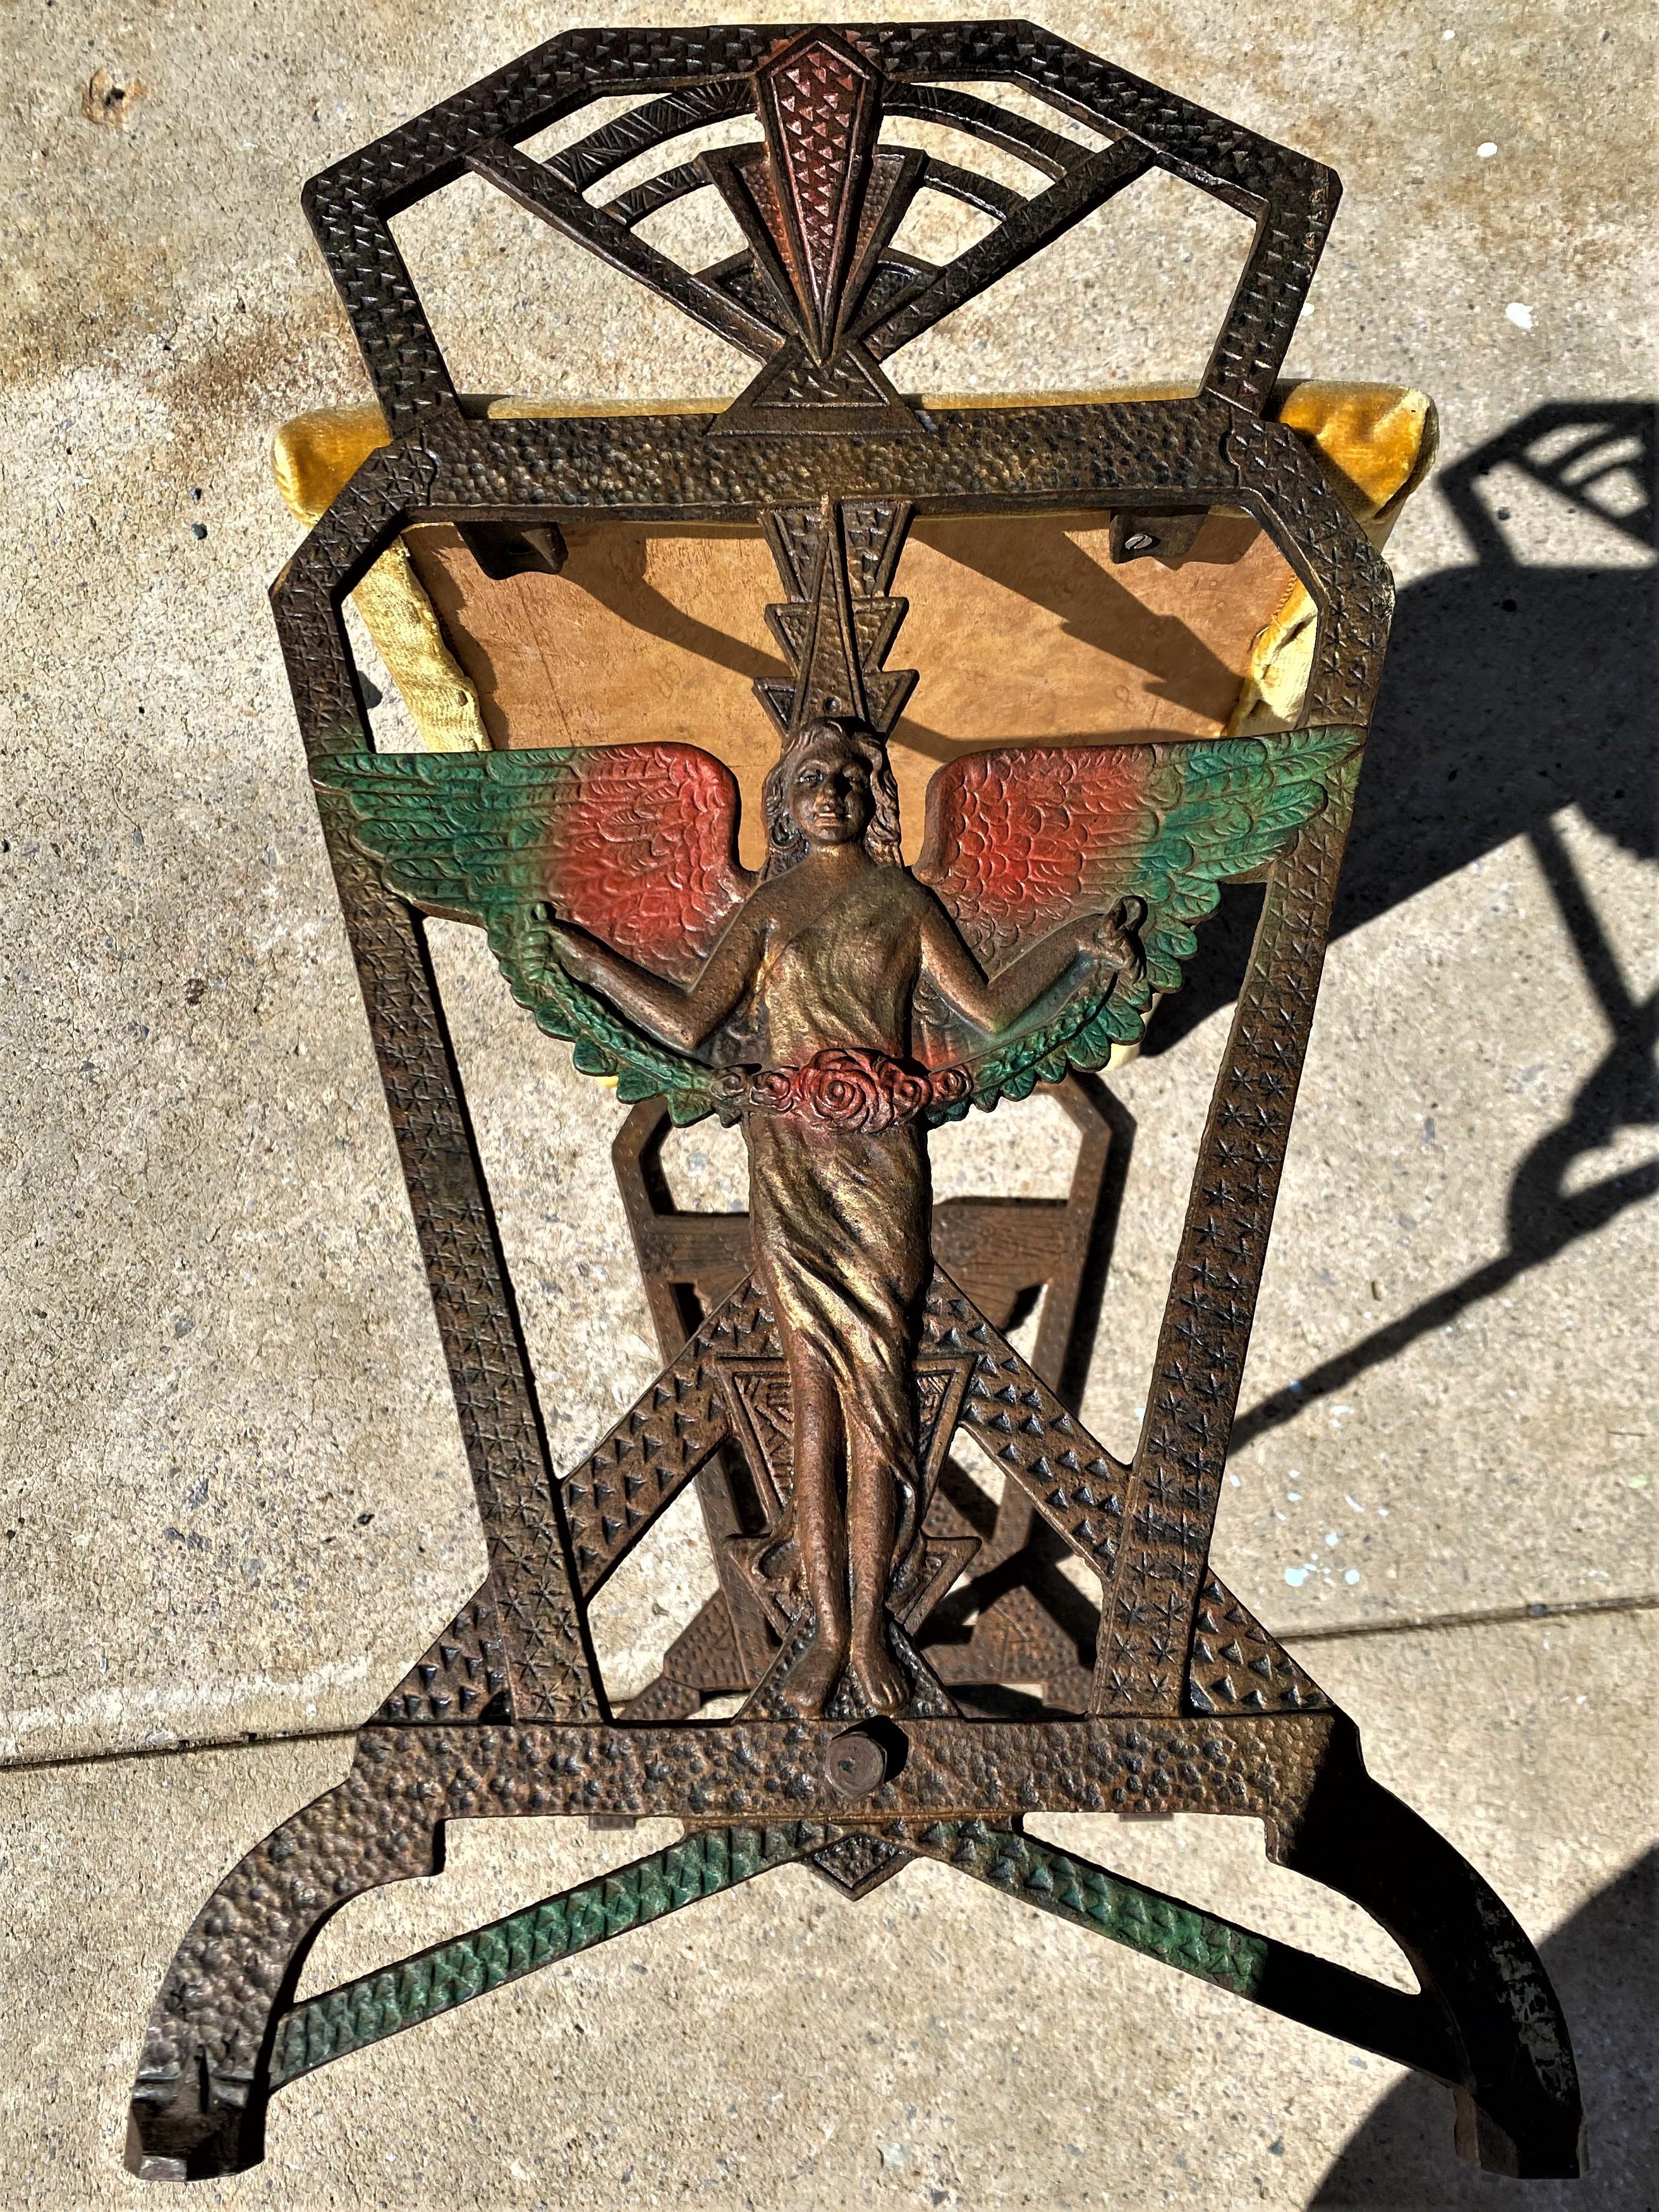 This is an absolutely fabulous art deco pattern bench with an amazing winged female figure in relief, draping a rose garland and topped with a radiating fan. The original colors, Bronze, orange, black & green, which were sprayed on are still vibrant